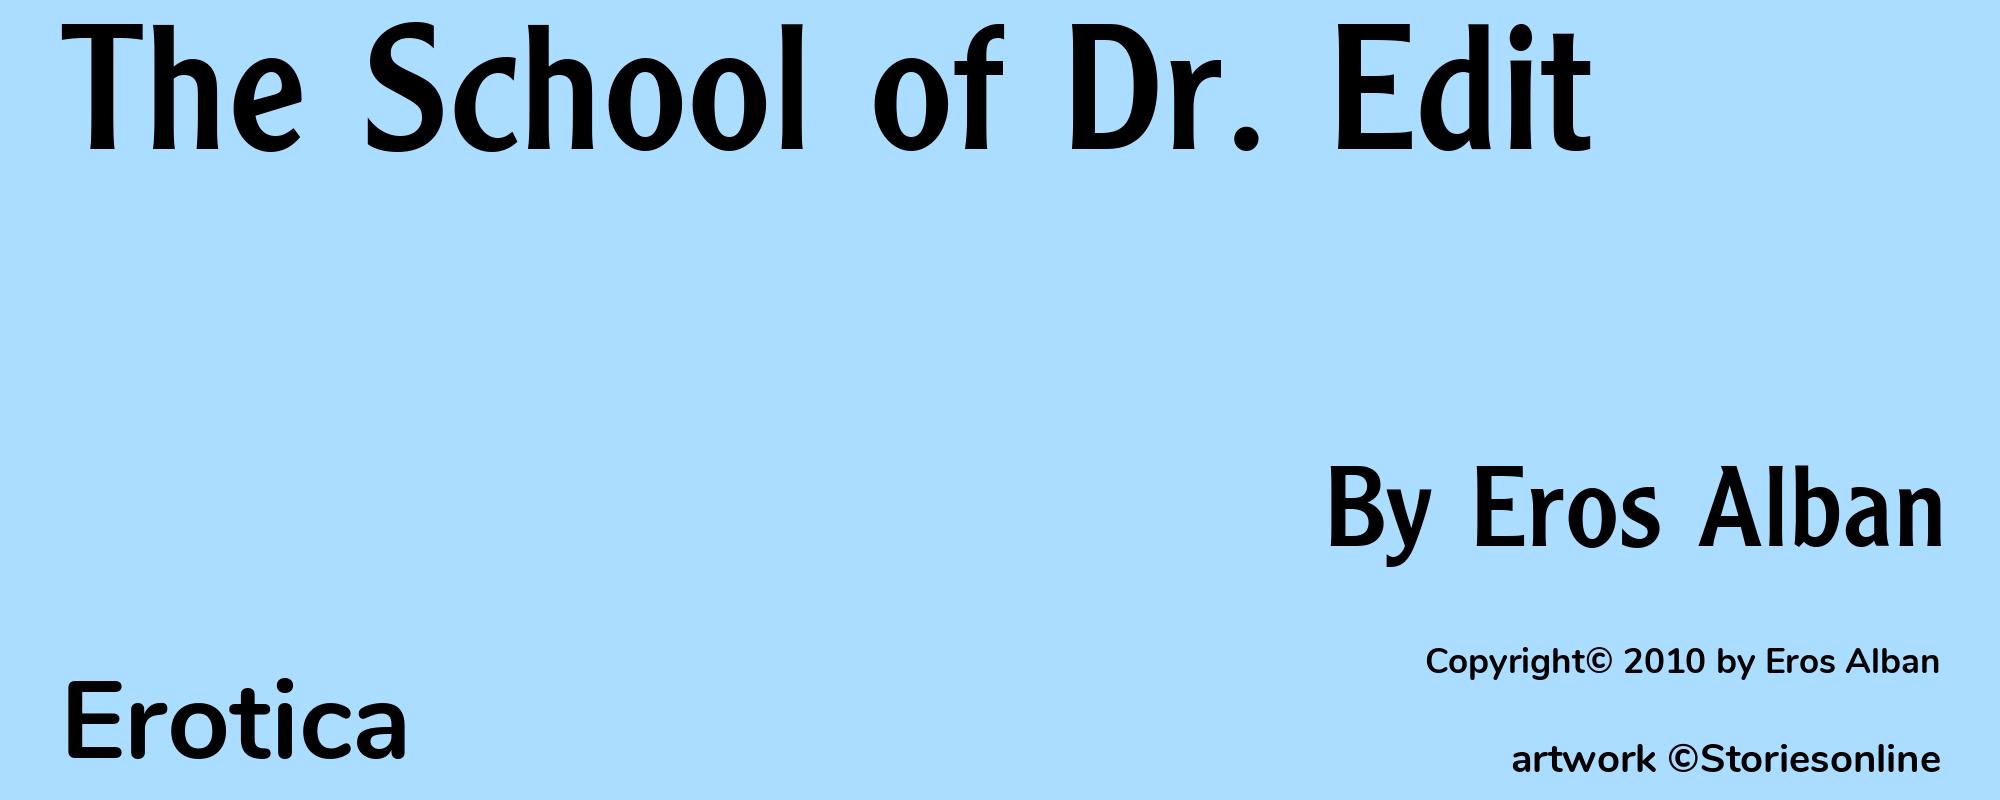 The School of Dr. Edit - Cover